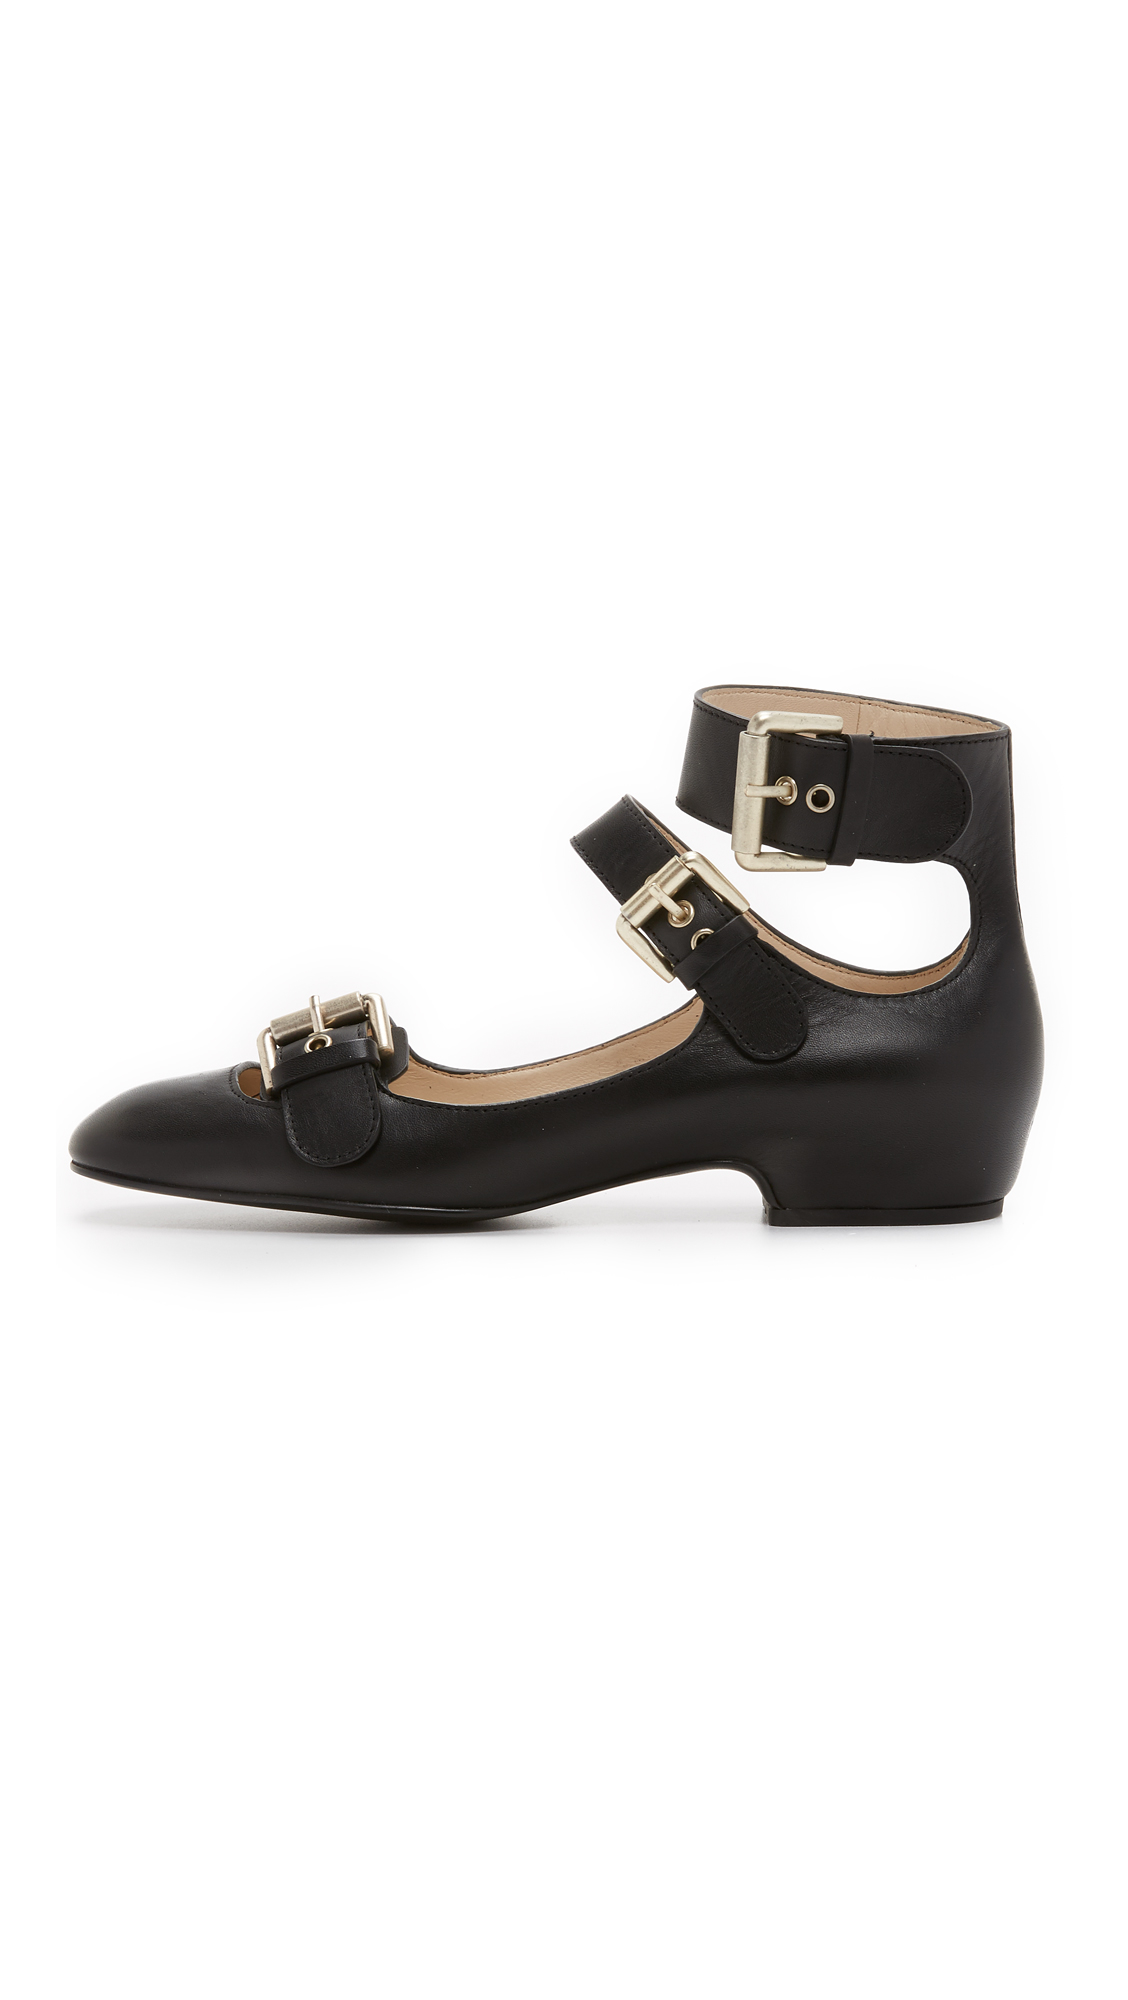 Lyst - See By Chloé Polly Buckle Flats in Black